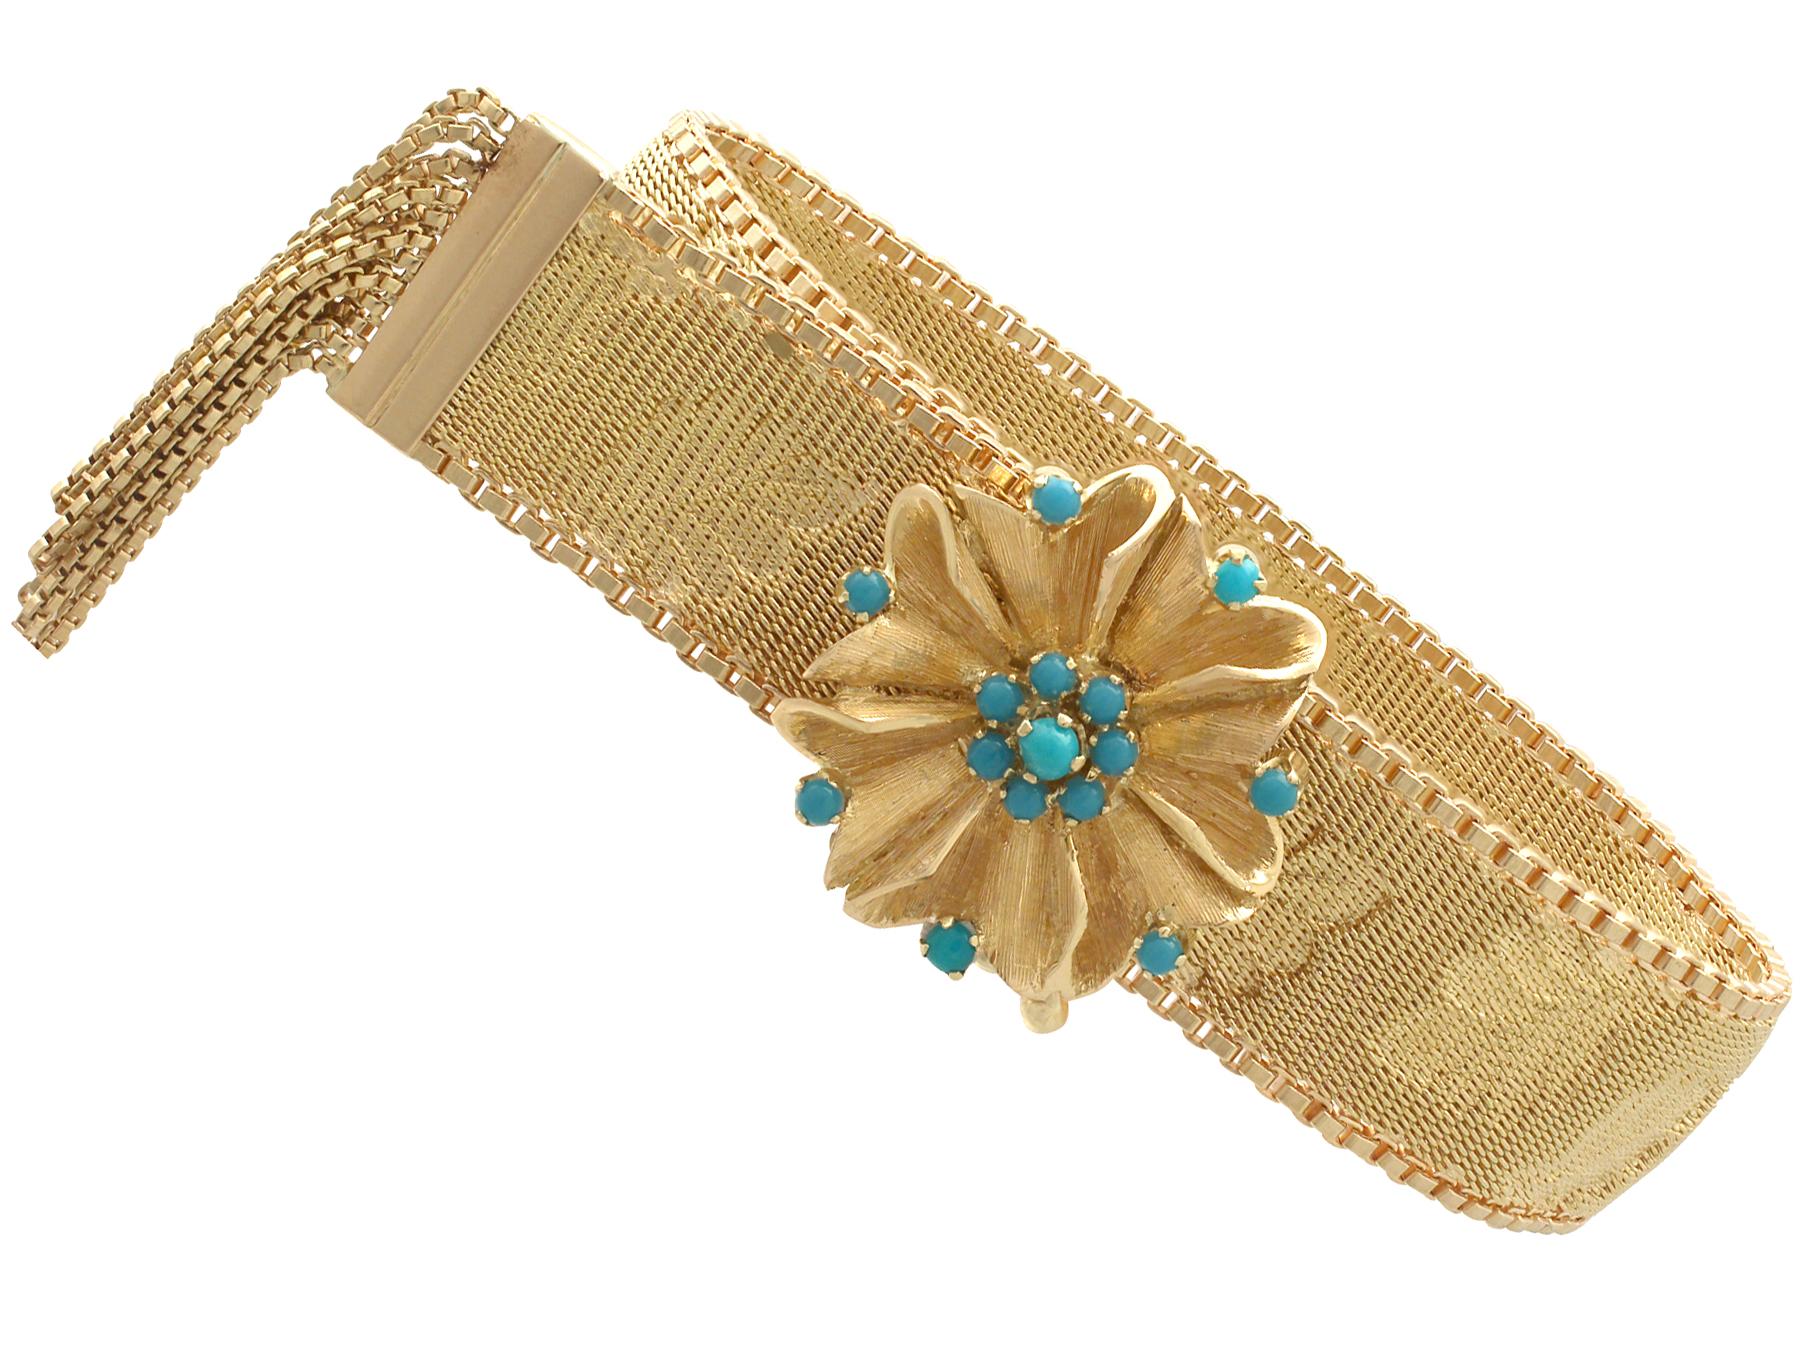 An impressive vintage Italian turquoise and 18k yellow gold adjustable milanese loop bracelet; part of our diverse vintage jewelry and estate jewelry collections

This fine and impressive vintage turquoise bracelet has been crafted in 18k yellow